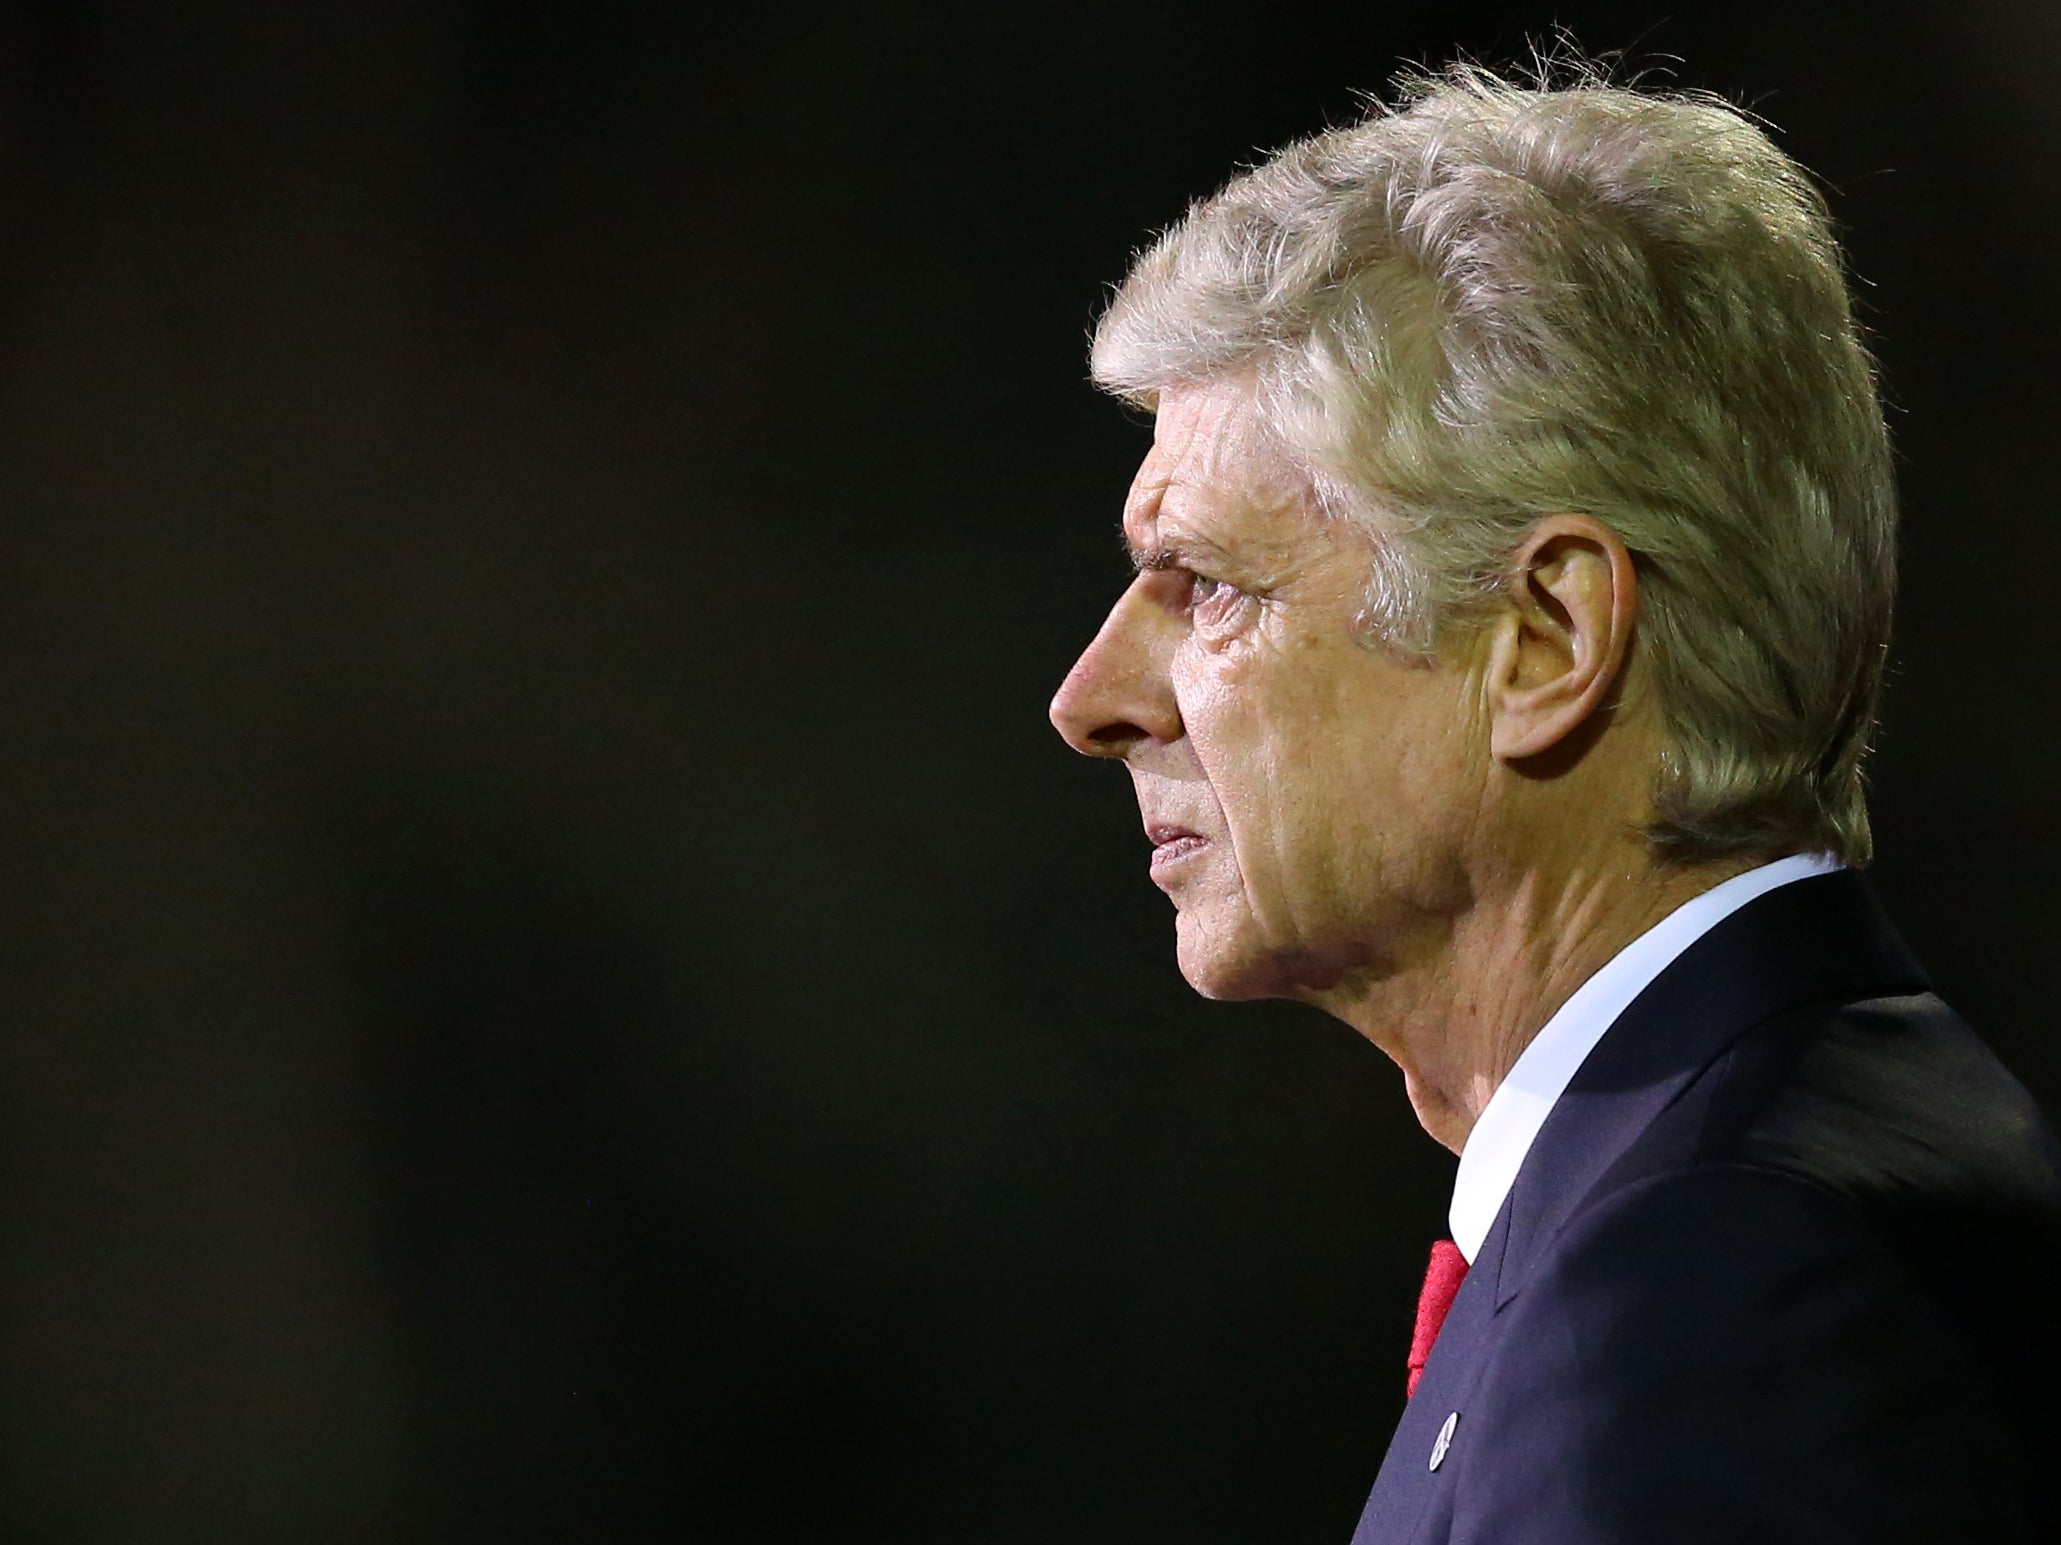 Wenger's first choice is to remain at Arsenal